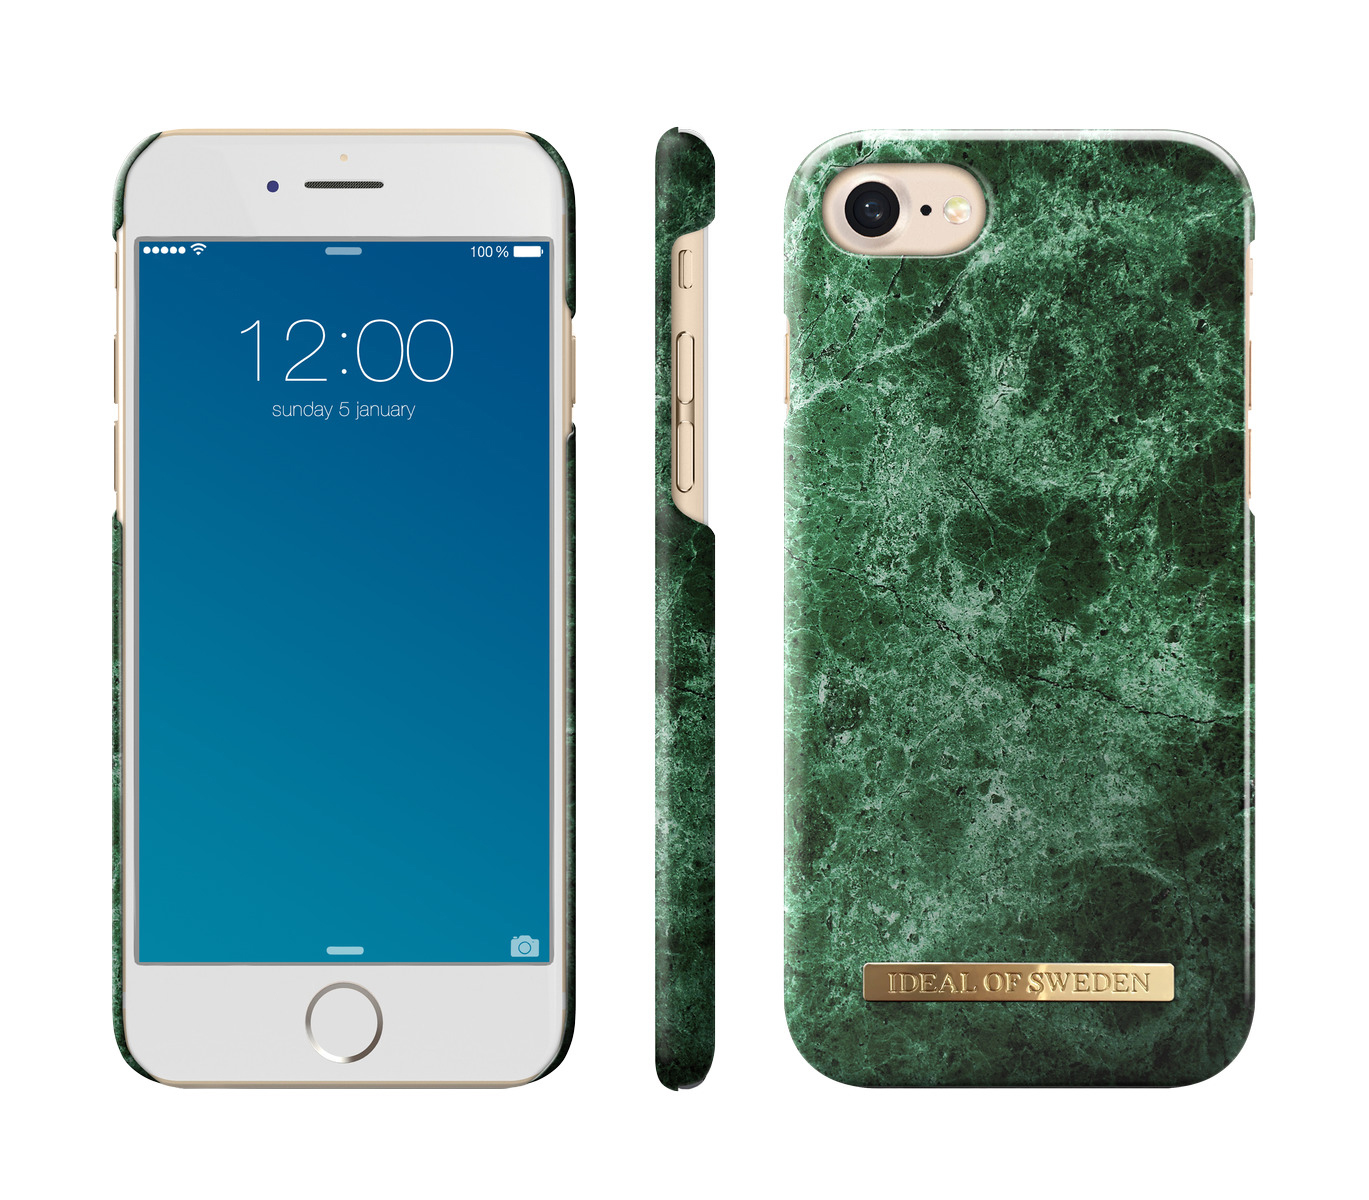 SWEDEN iPhone 7, 8, Apple, Green 6, Fashion, Backcover, IDEAL iPhone OF Marble iPhone